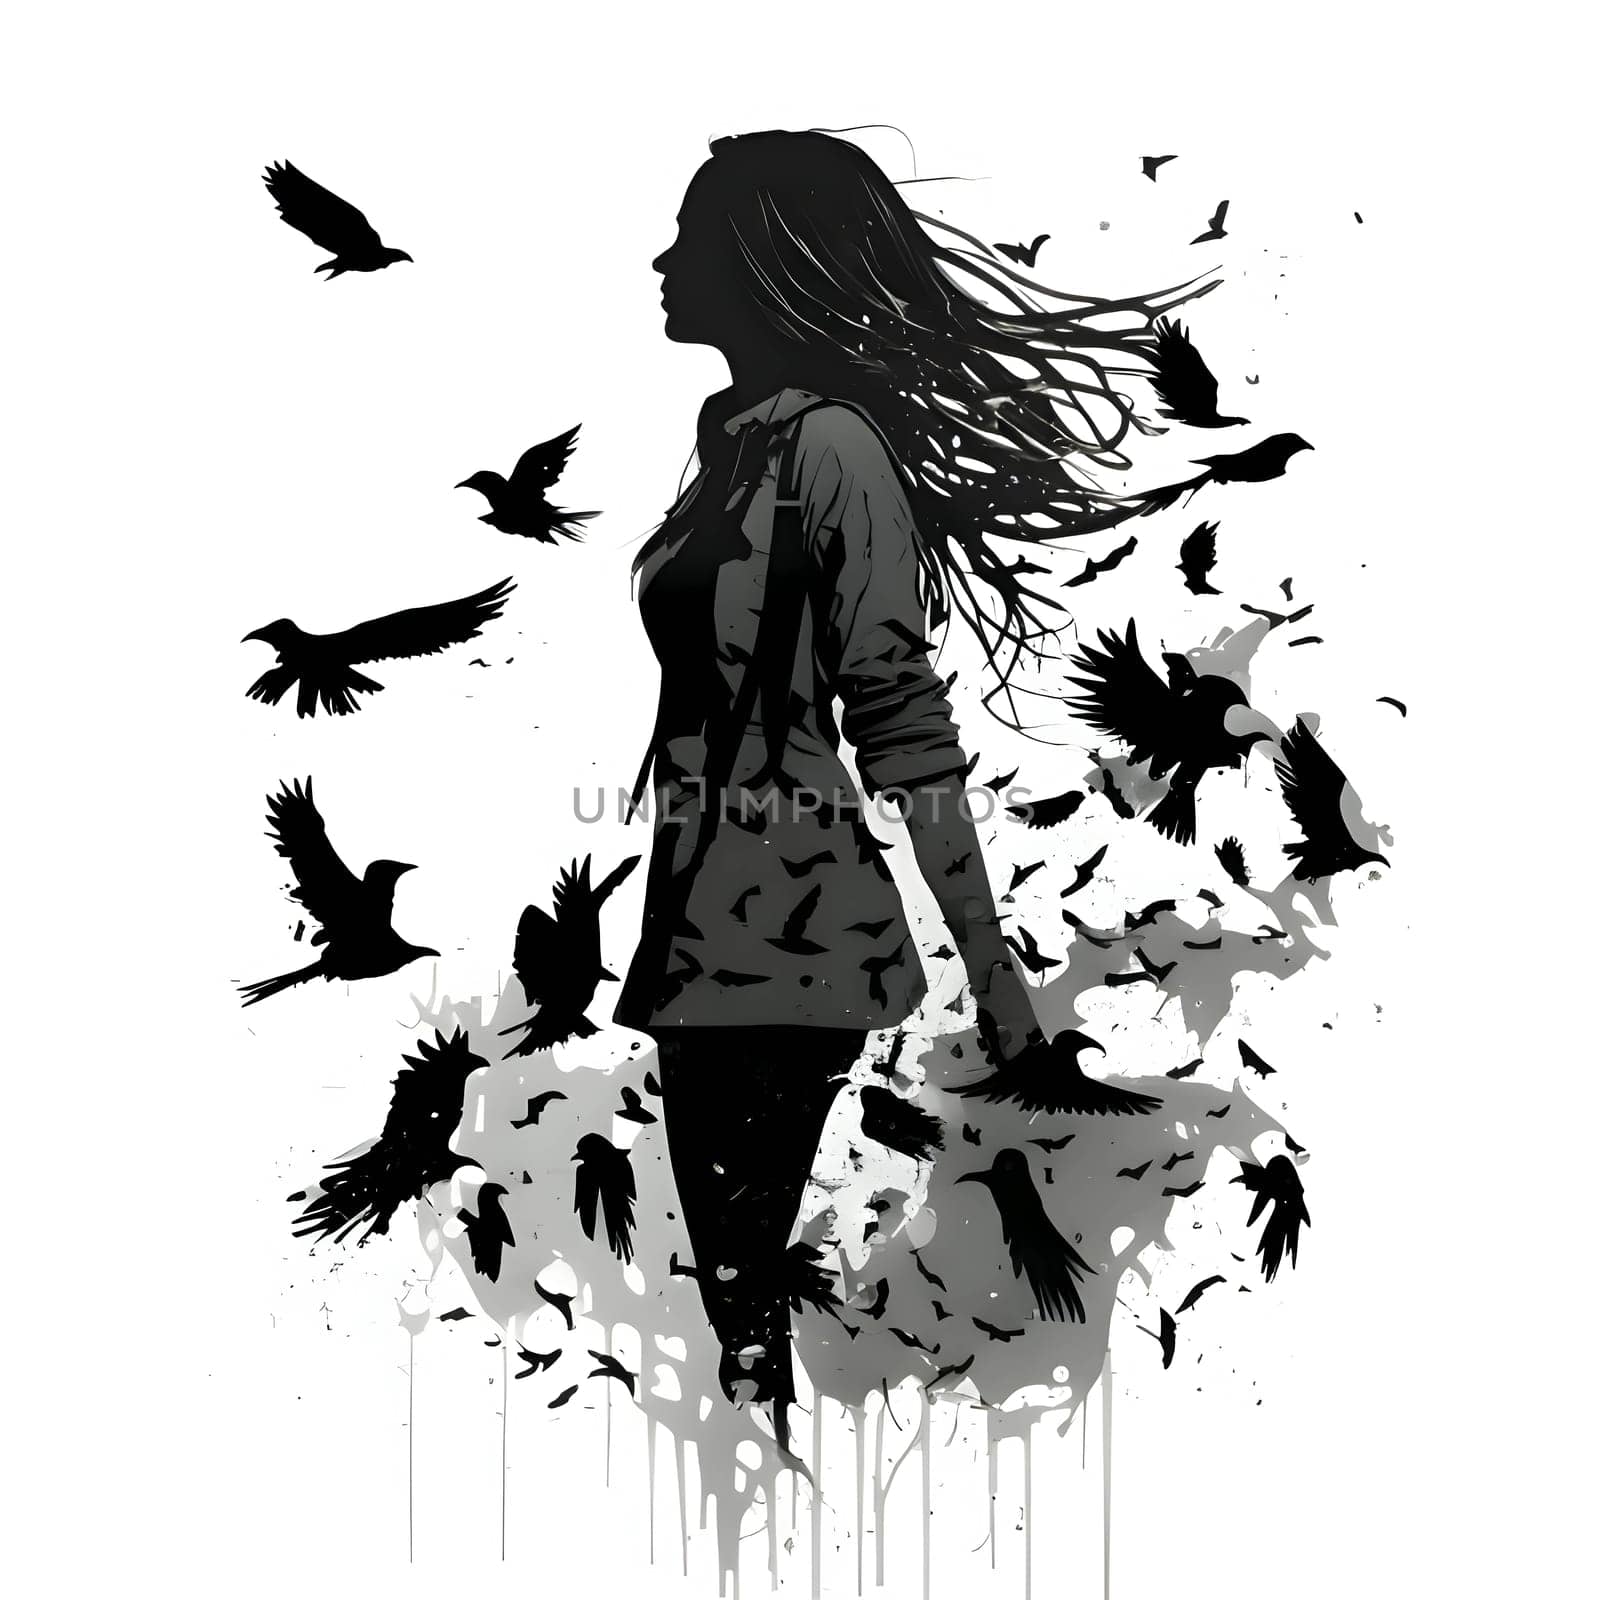 Vector illustration of a girls with birds in black silhouette against a clean white background, capturing graceful forms.